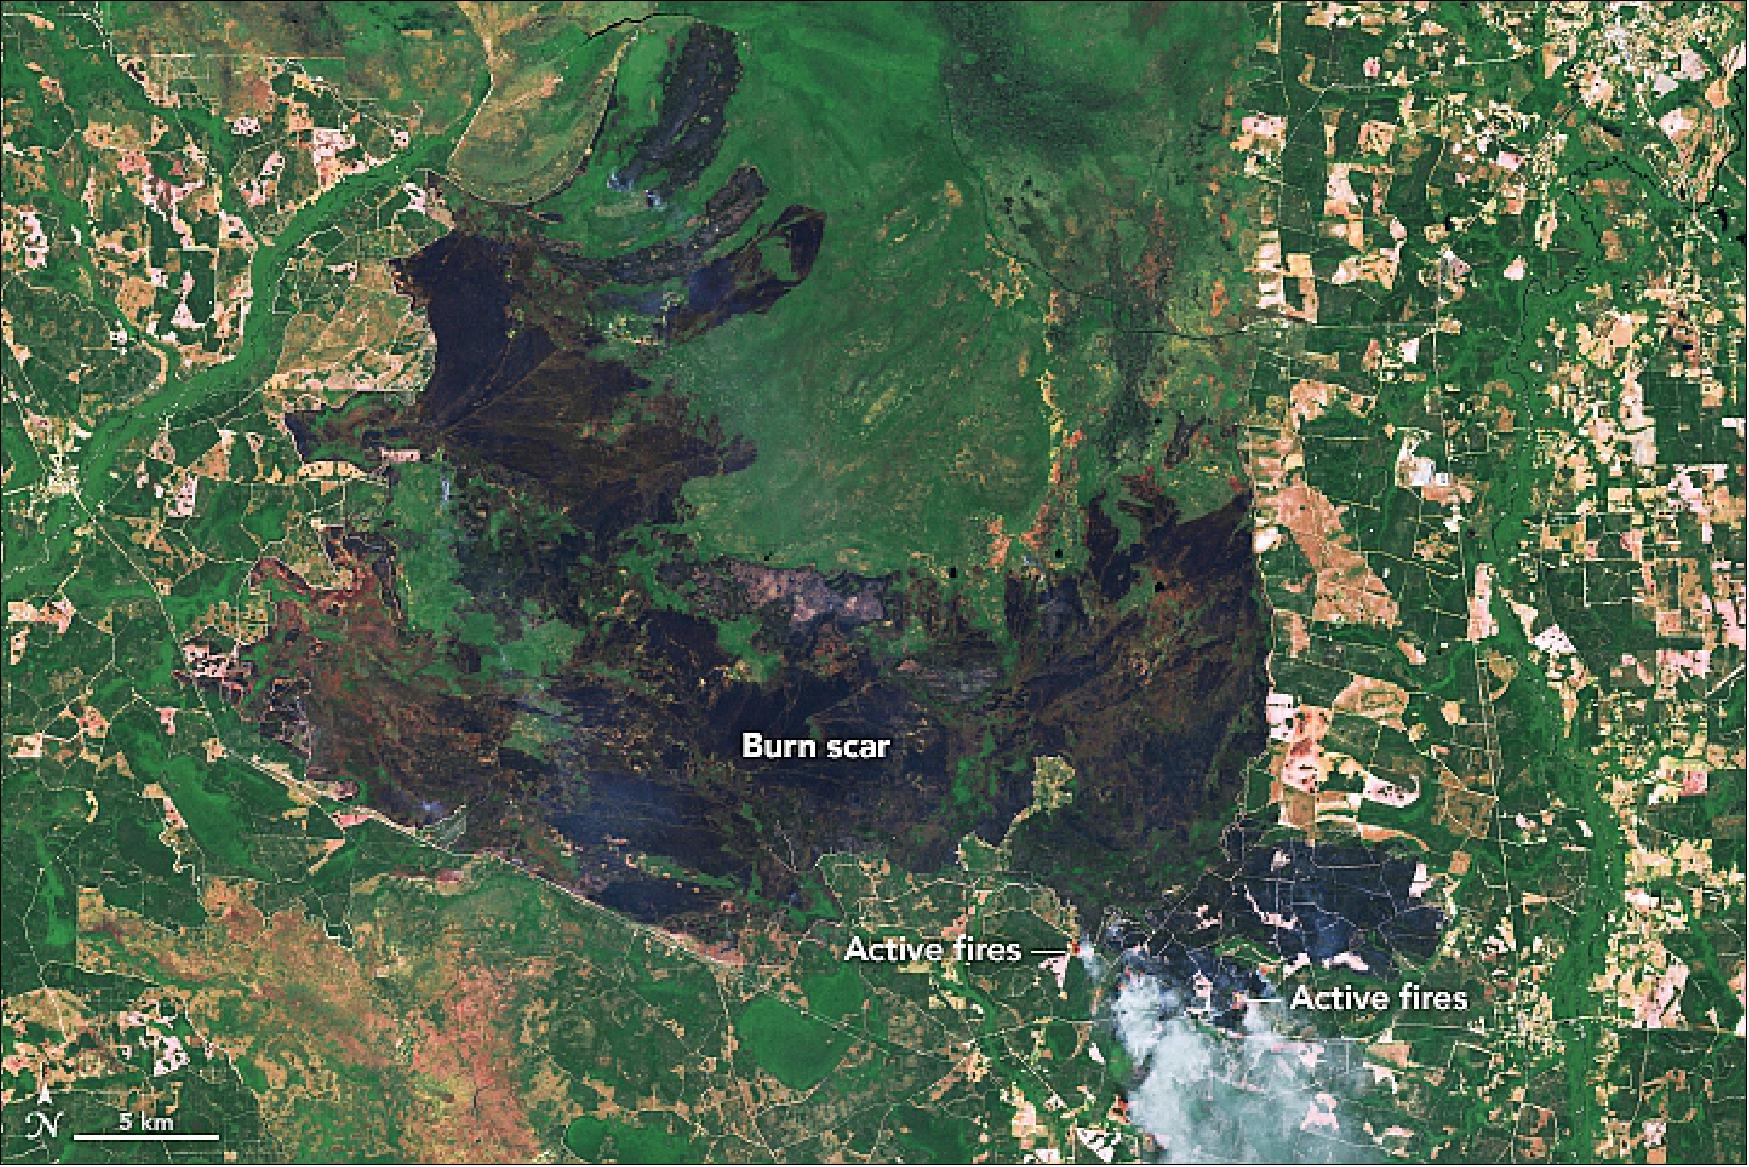 Figure 34: The composite image of ETM+ of Landsat-7 combines natural color and infrared data. The brown burn scar is clearly visible amid the refuge’s green vegetation. Thermal data show the locations of active fires. Most actively burning areas in this image appear outside of the refuge, near Highway 94 and west of Saint George, Georgia (image credit: NASA Earth Observatory, image by Joshua Stevens, using Landsat data from the USGS)